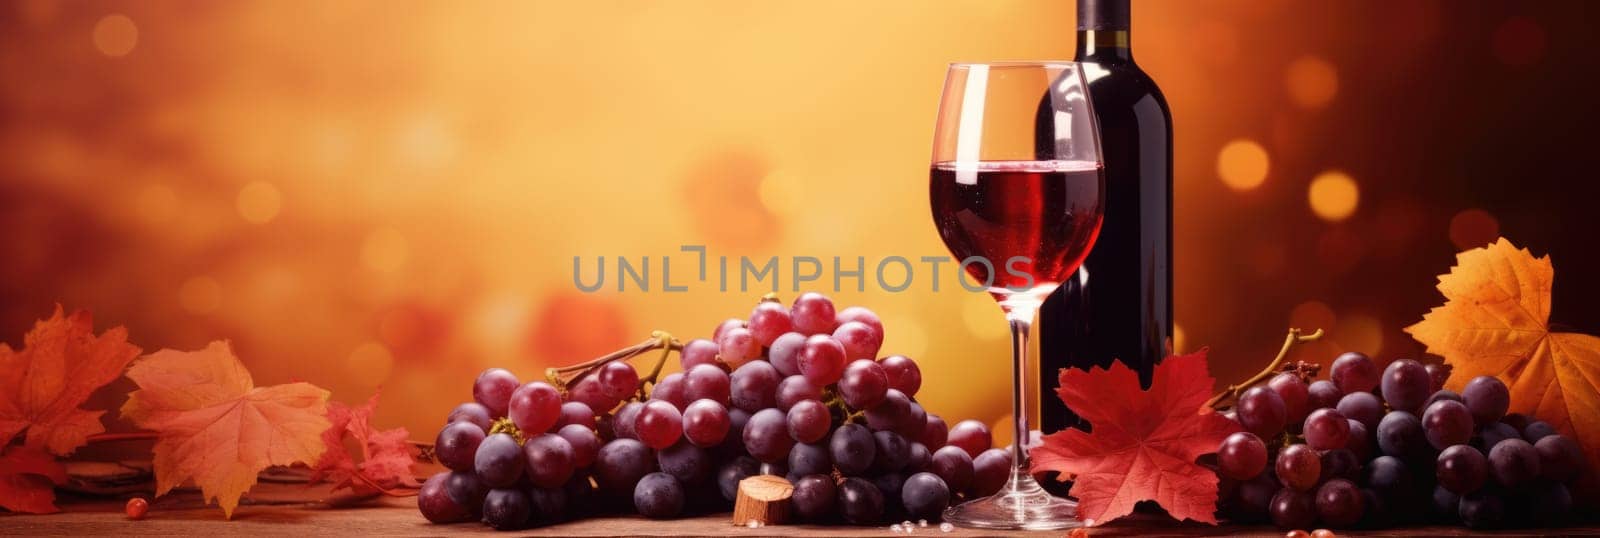 Wine and grapes background. Wide format banner by natali_brill